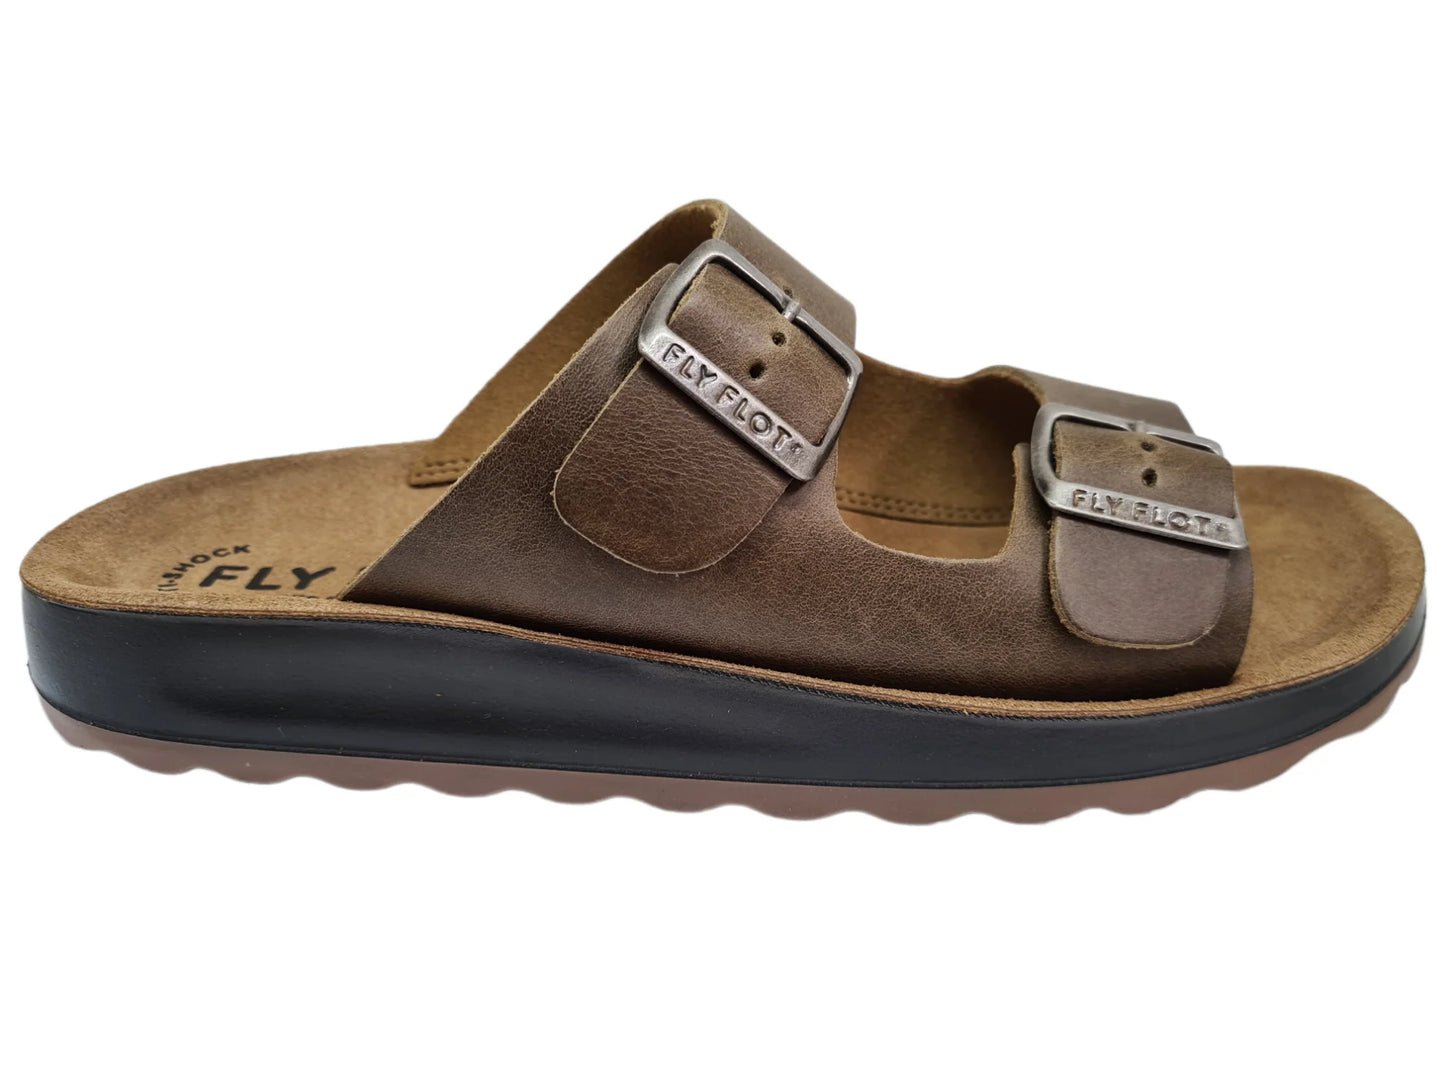 - FLY FLOT Mens Sandal 2 BUCKLE ROVERE (BROWN) (78171) - B2 - F